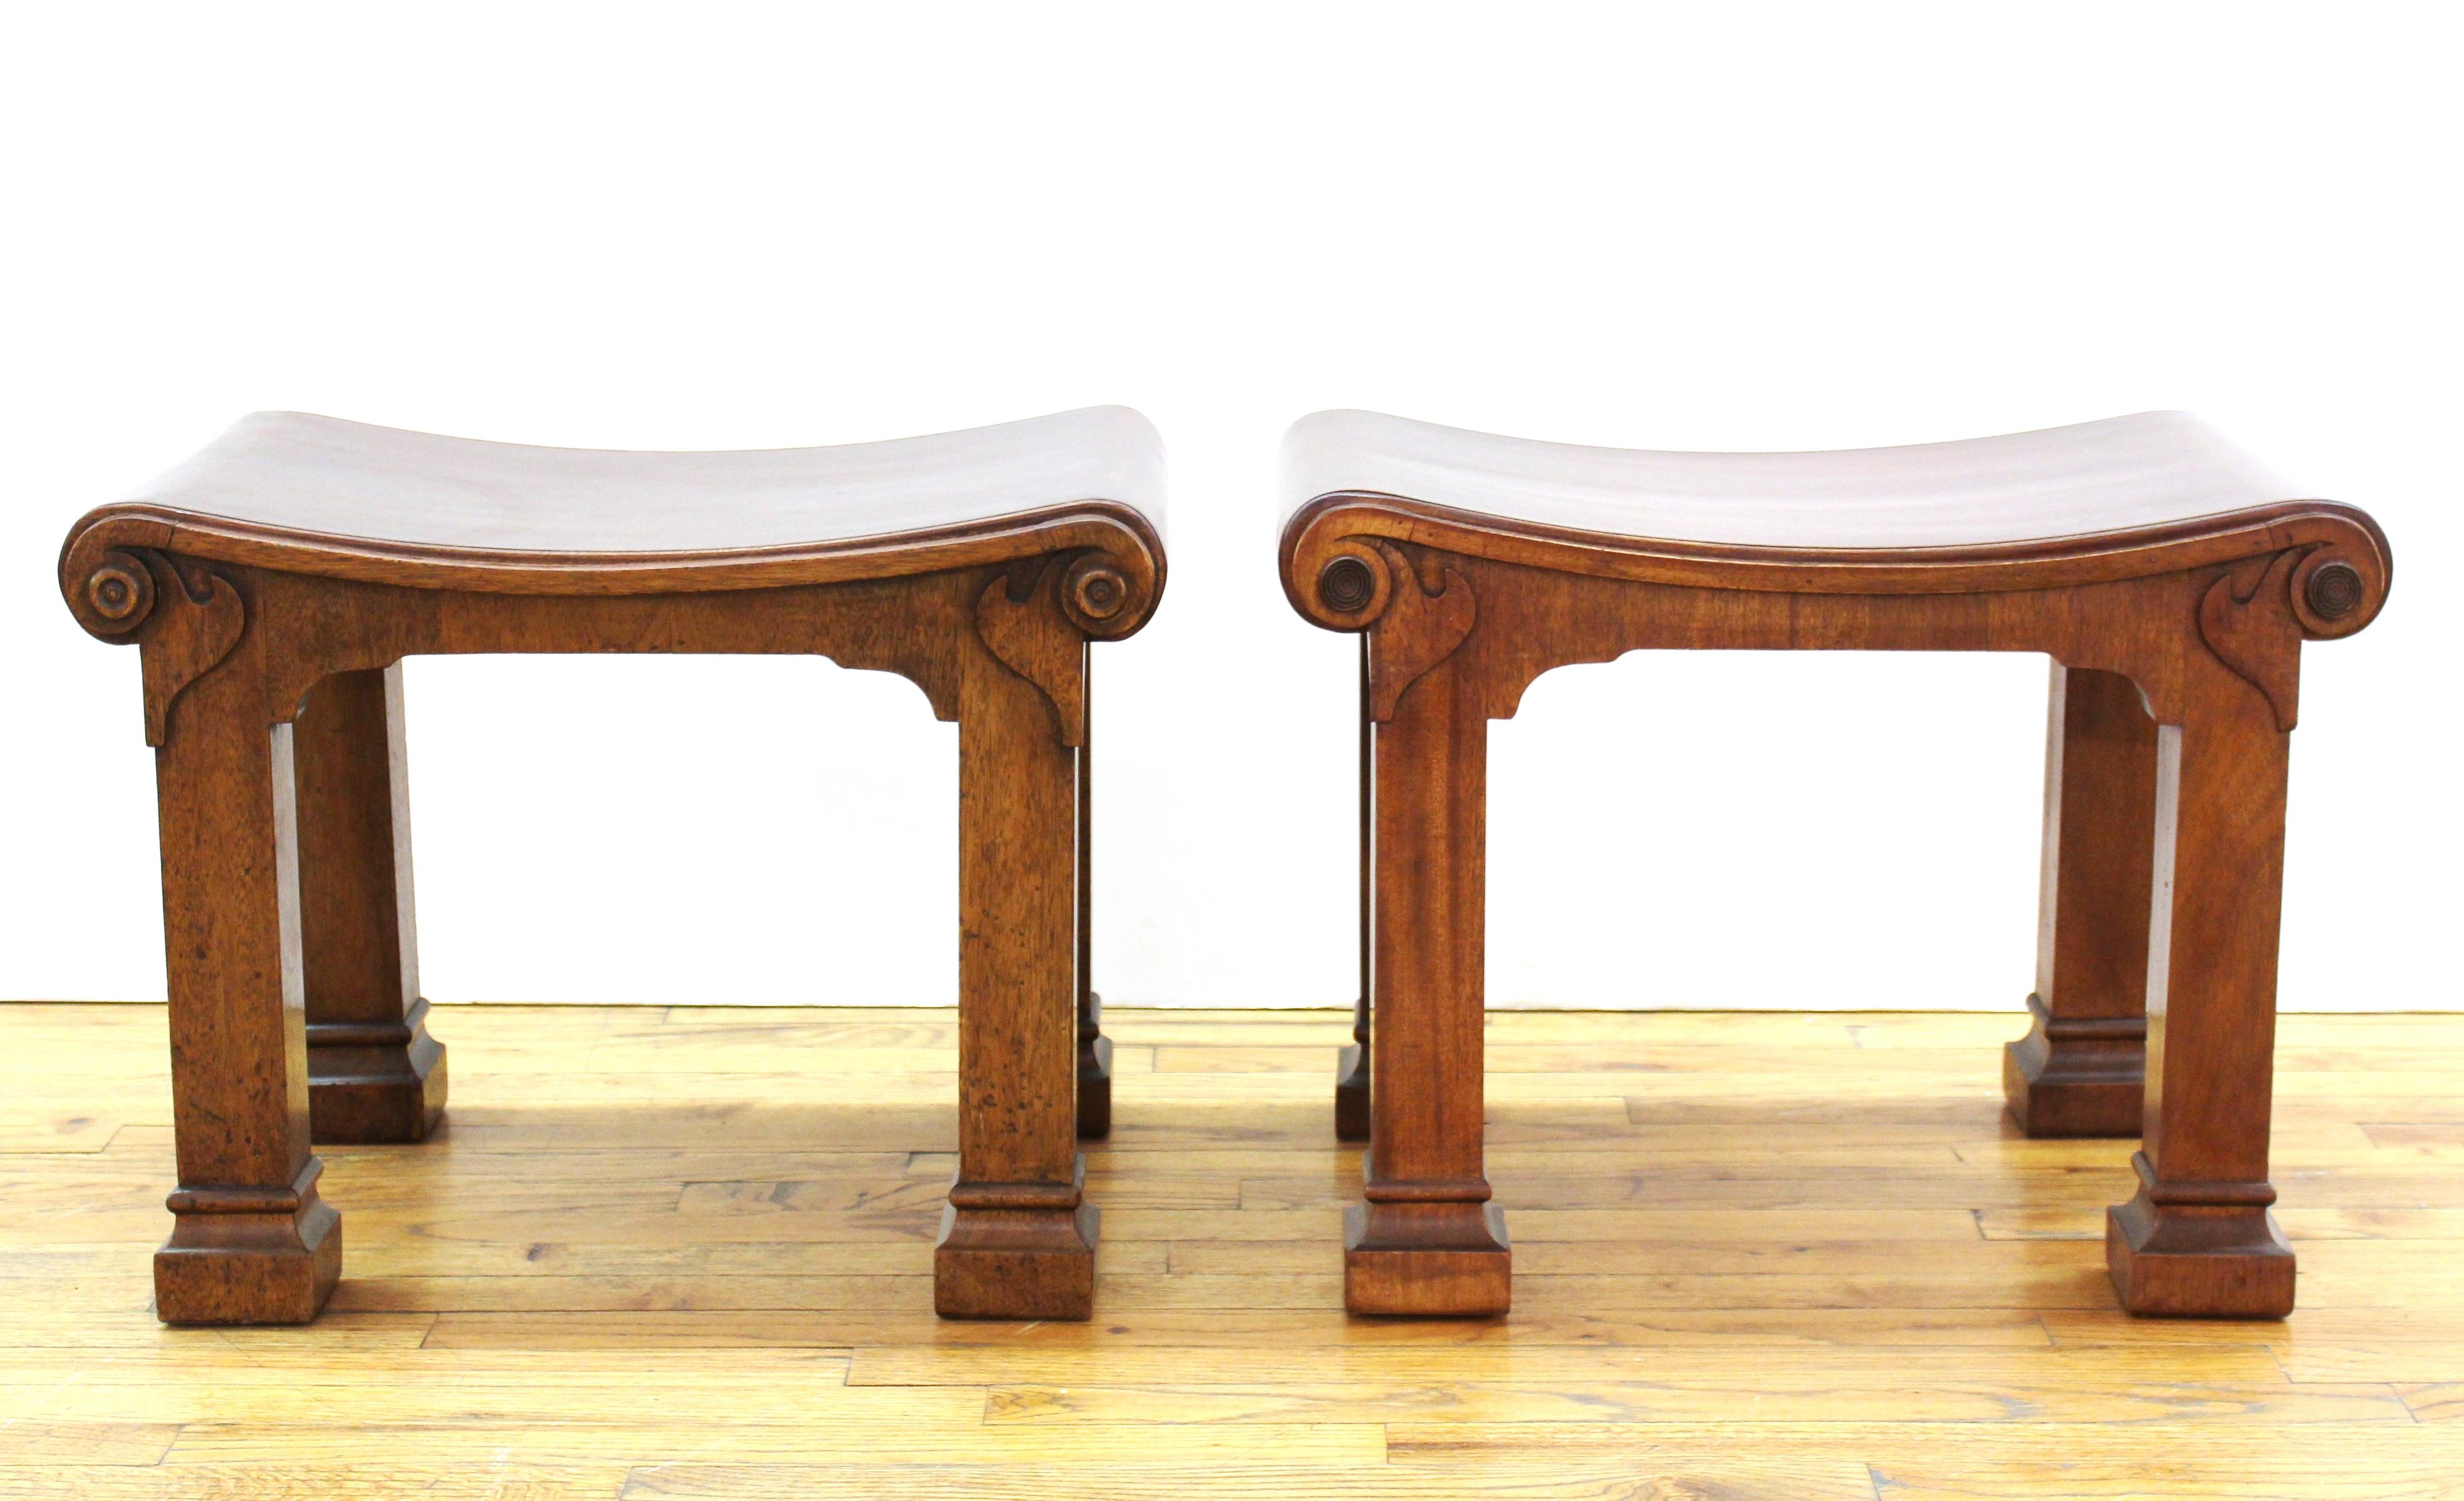 Neoclassical Revival style pair of carved wood benches attributed to T. H. Robsjohn Gibbings, showing decorative elements of the Greek Klismos style.